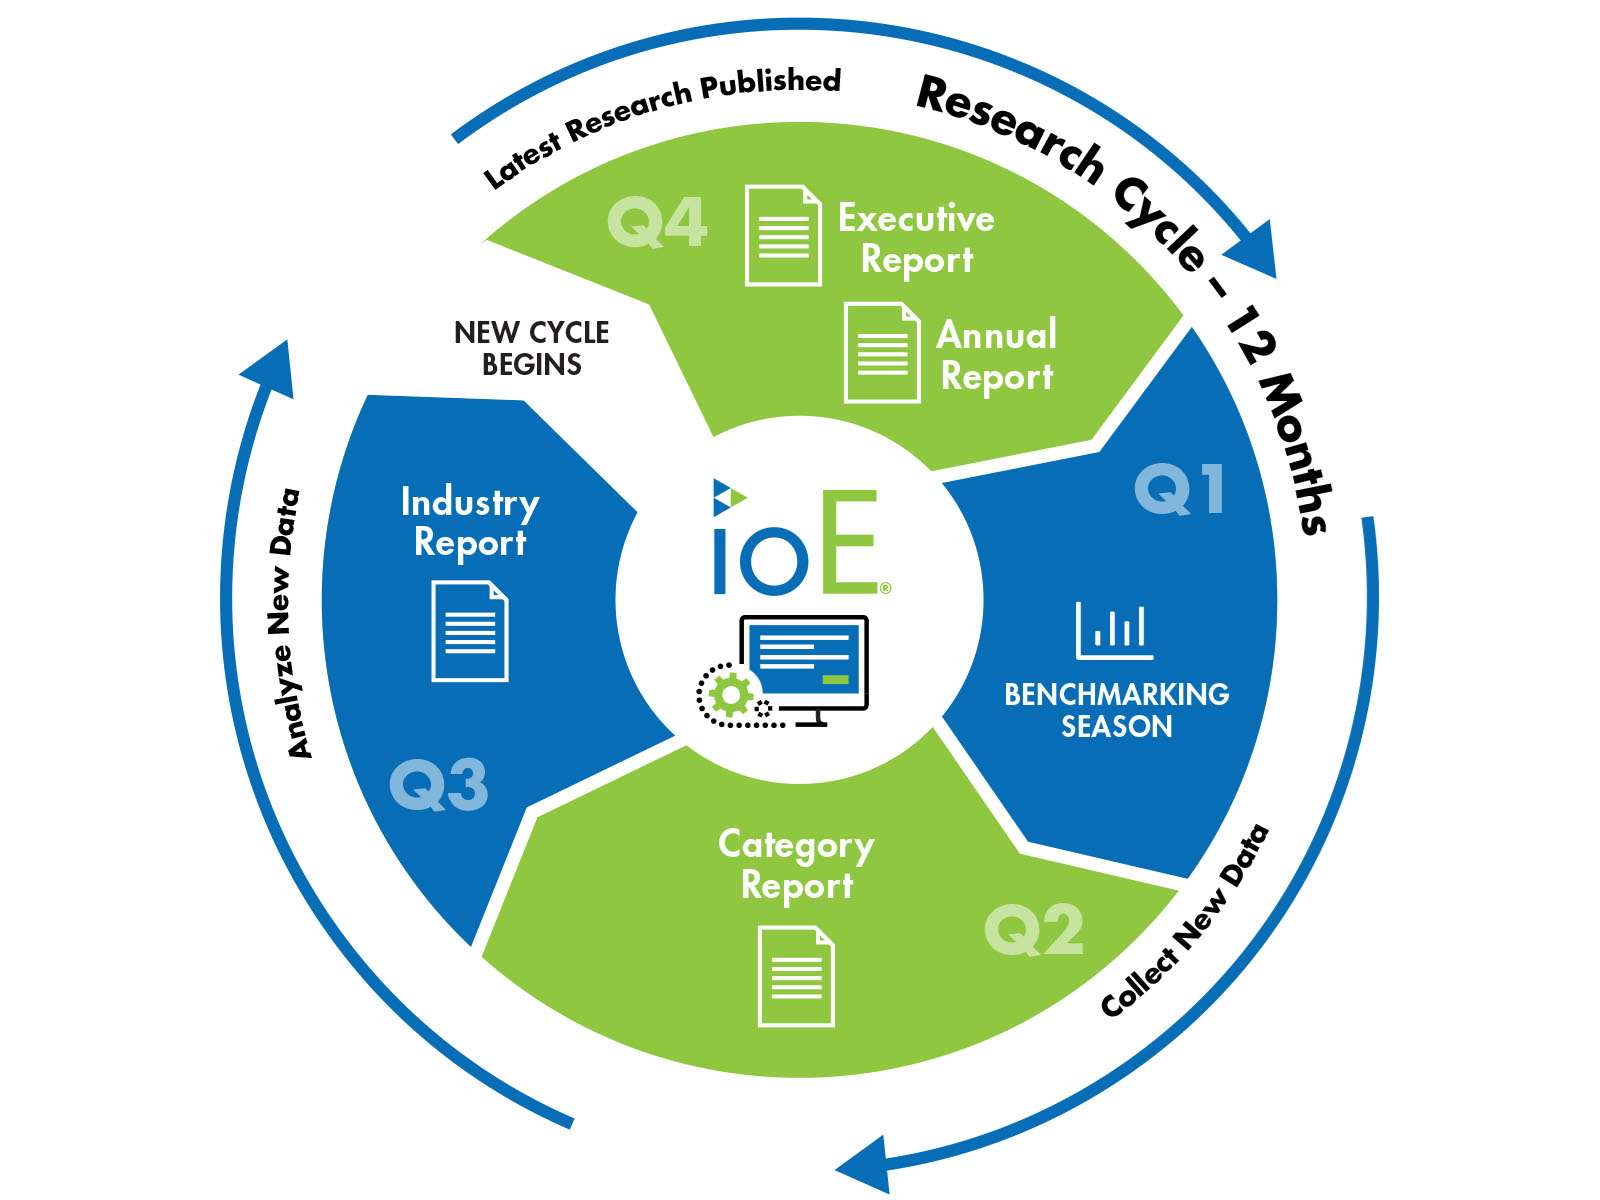 A circle image showing the lifecycle of the IoE research. At the top left, a new cycle begins with latest research published in Q4, benchmarking season in Q1, category report in Q2, and industry report in Q3.